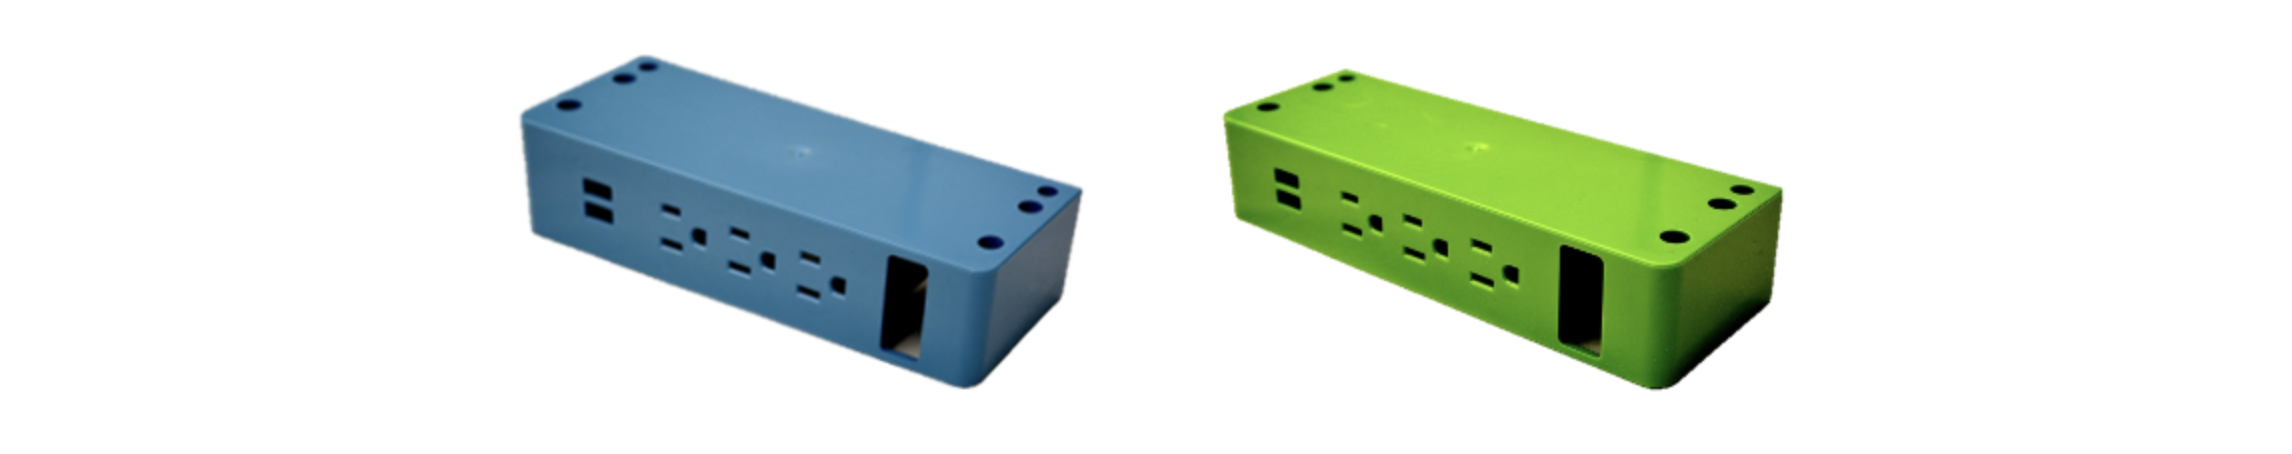 Blue and green A/C power strips